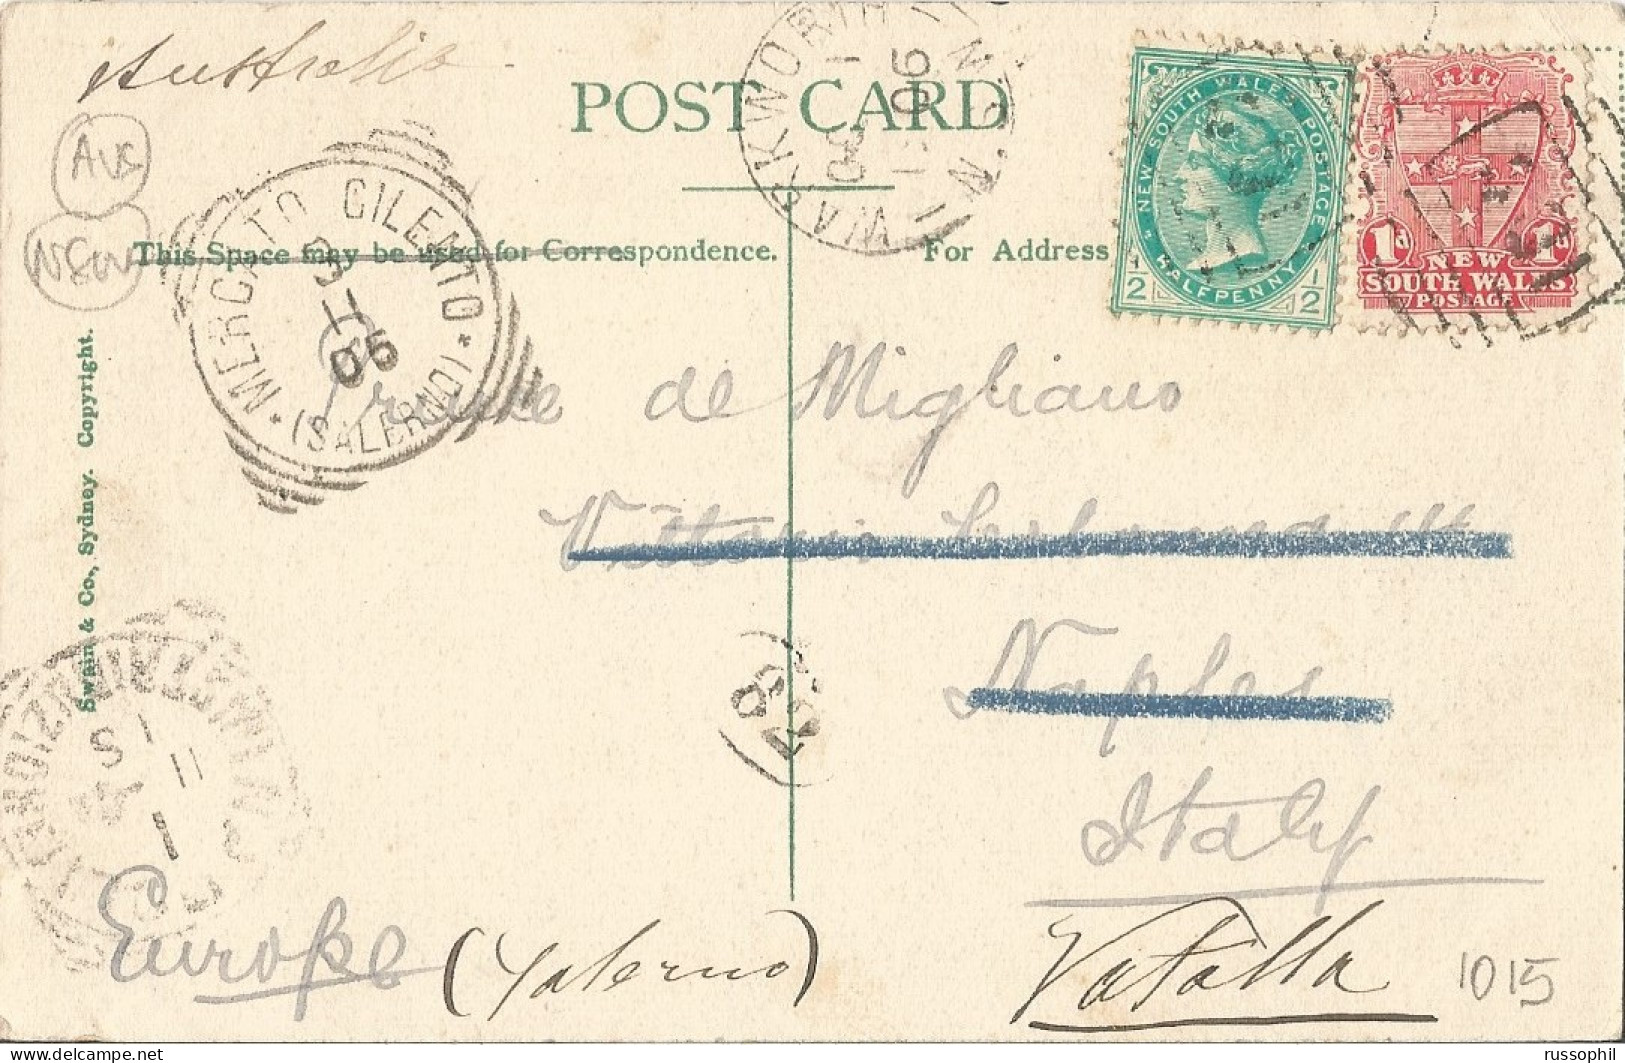 AUSTRALIA NSW - FRANKED PC (VIEW OF SYDNEY) FROM WARKWORTH TO ITALY - BARRED NUMERAL CANCEL 401 - 1905 - Briefe U. Dokumente